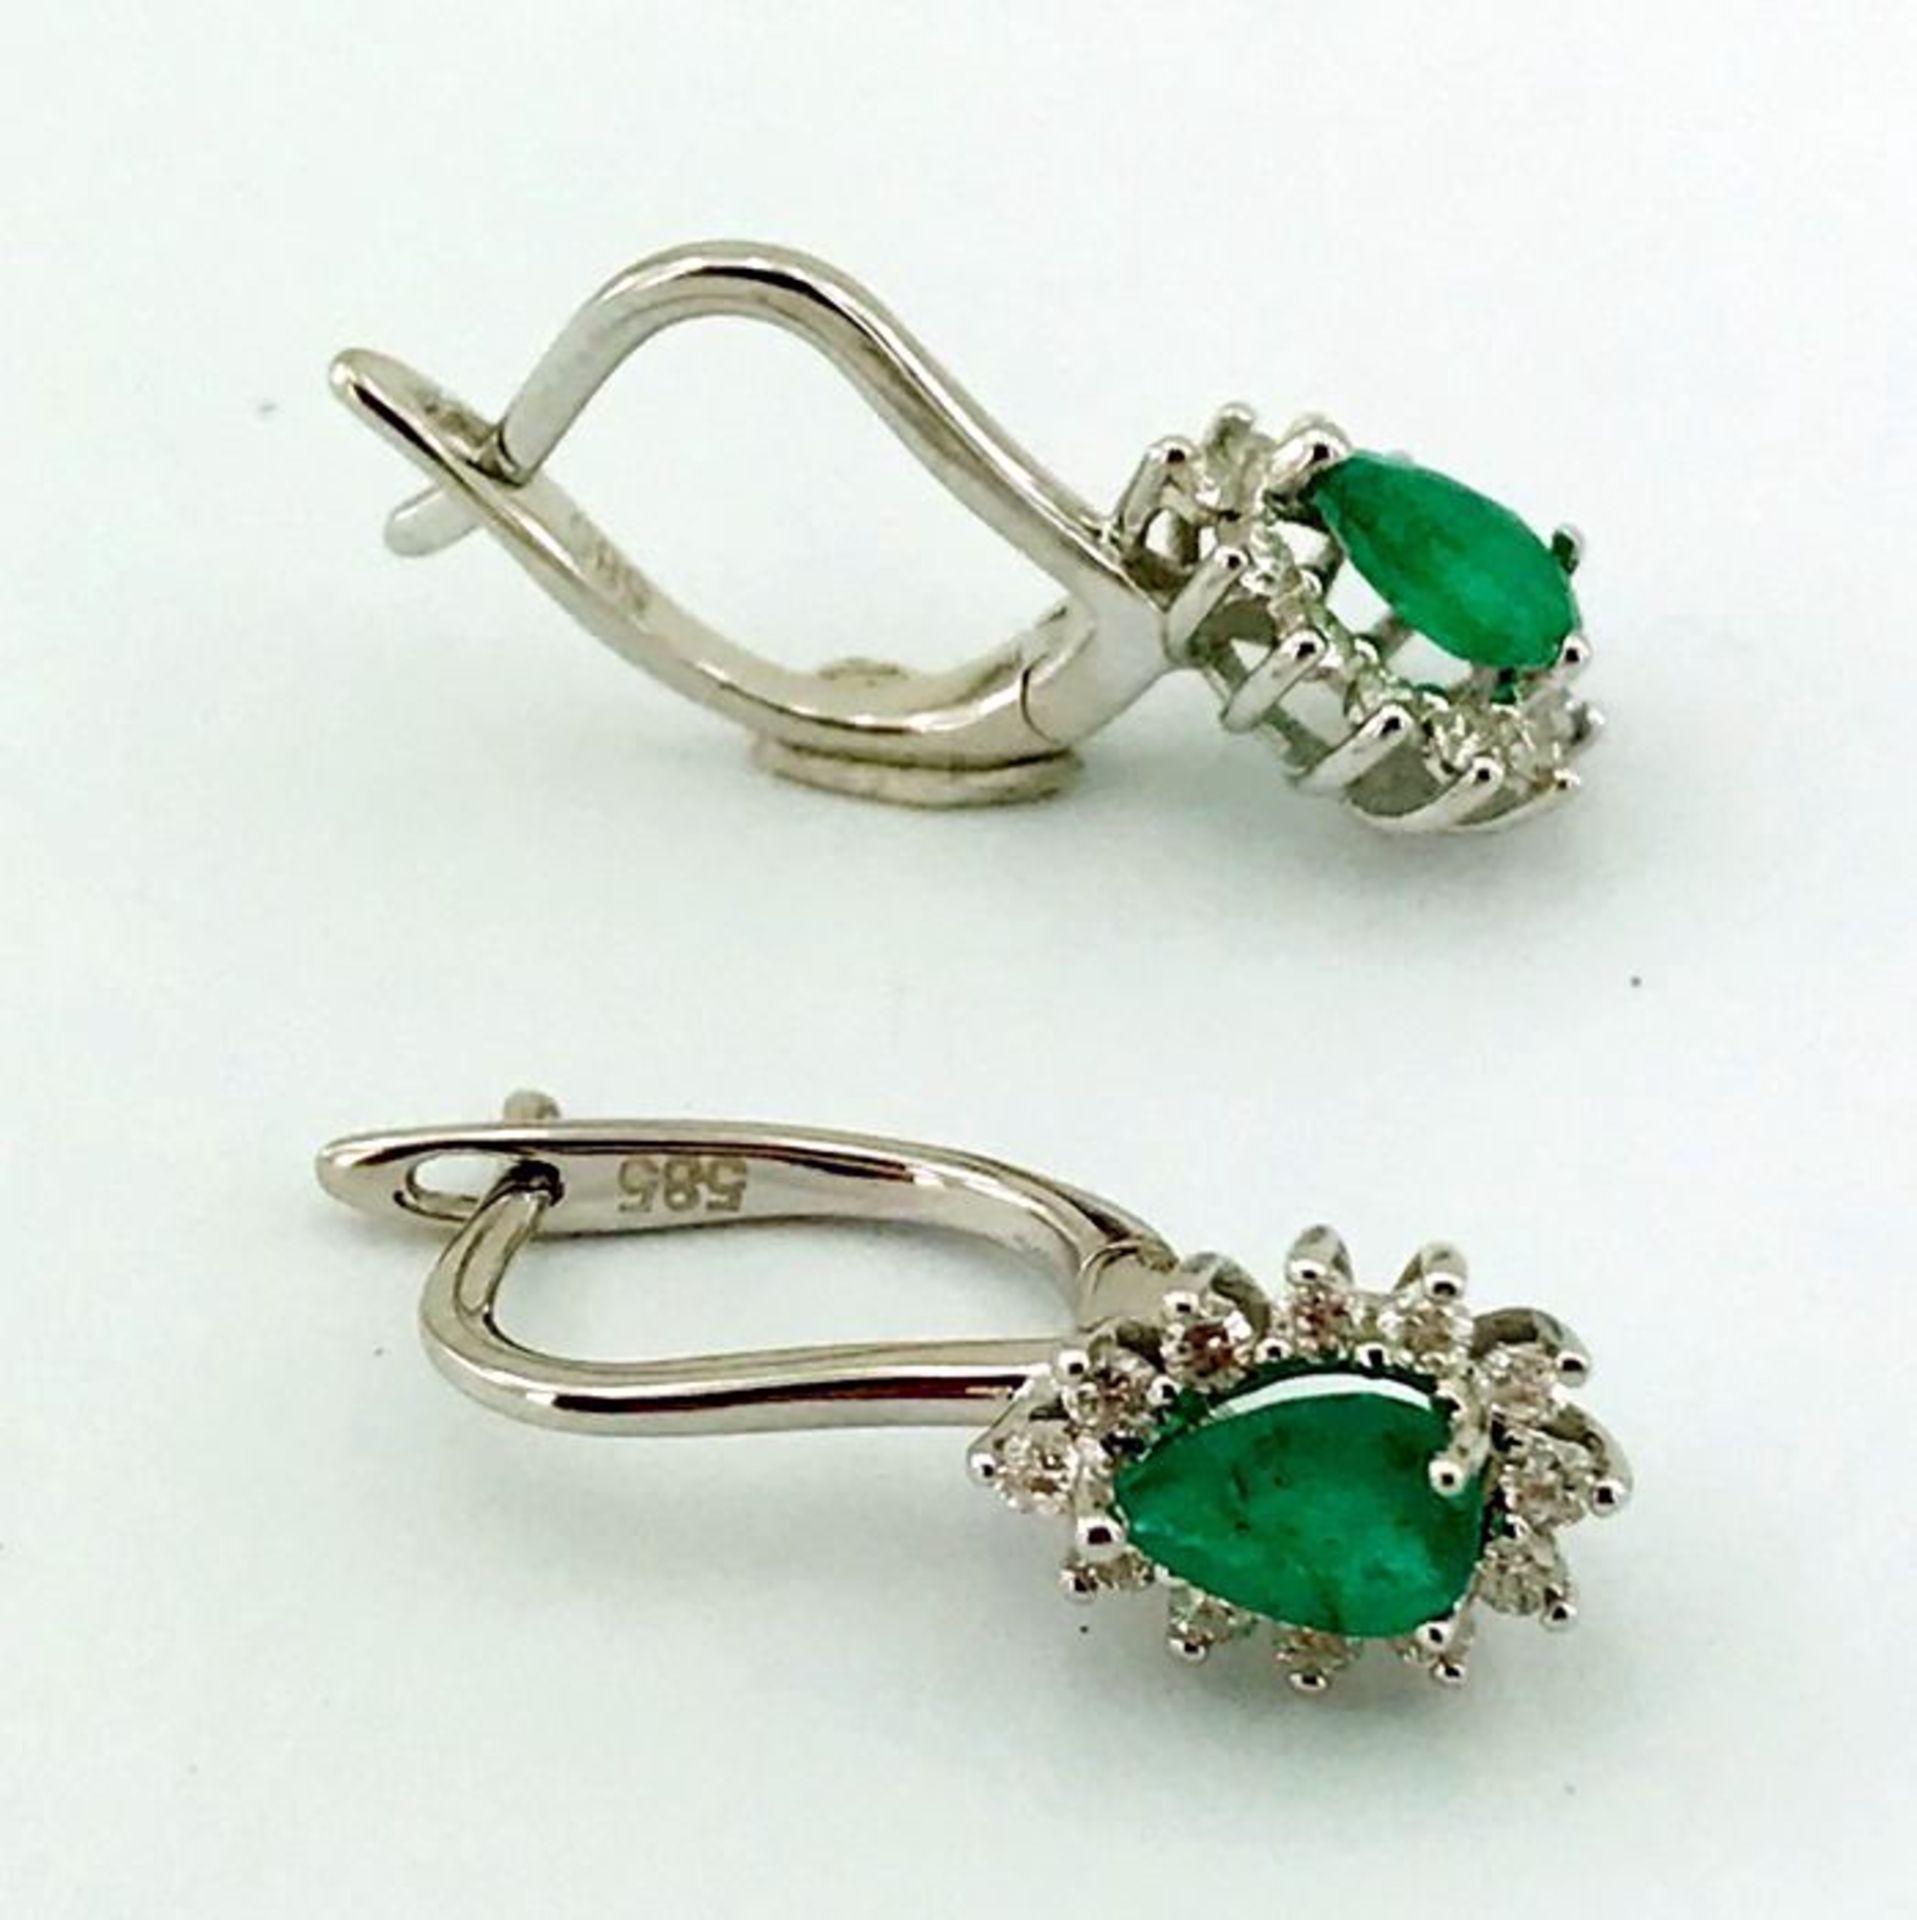 14K White Gold Cluster Earring set with emerald and brillant cut diamonds - 21 mm - Image 5 of 6